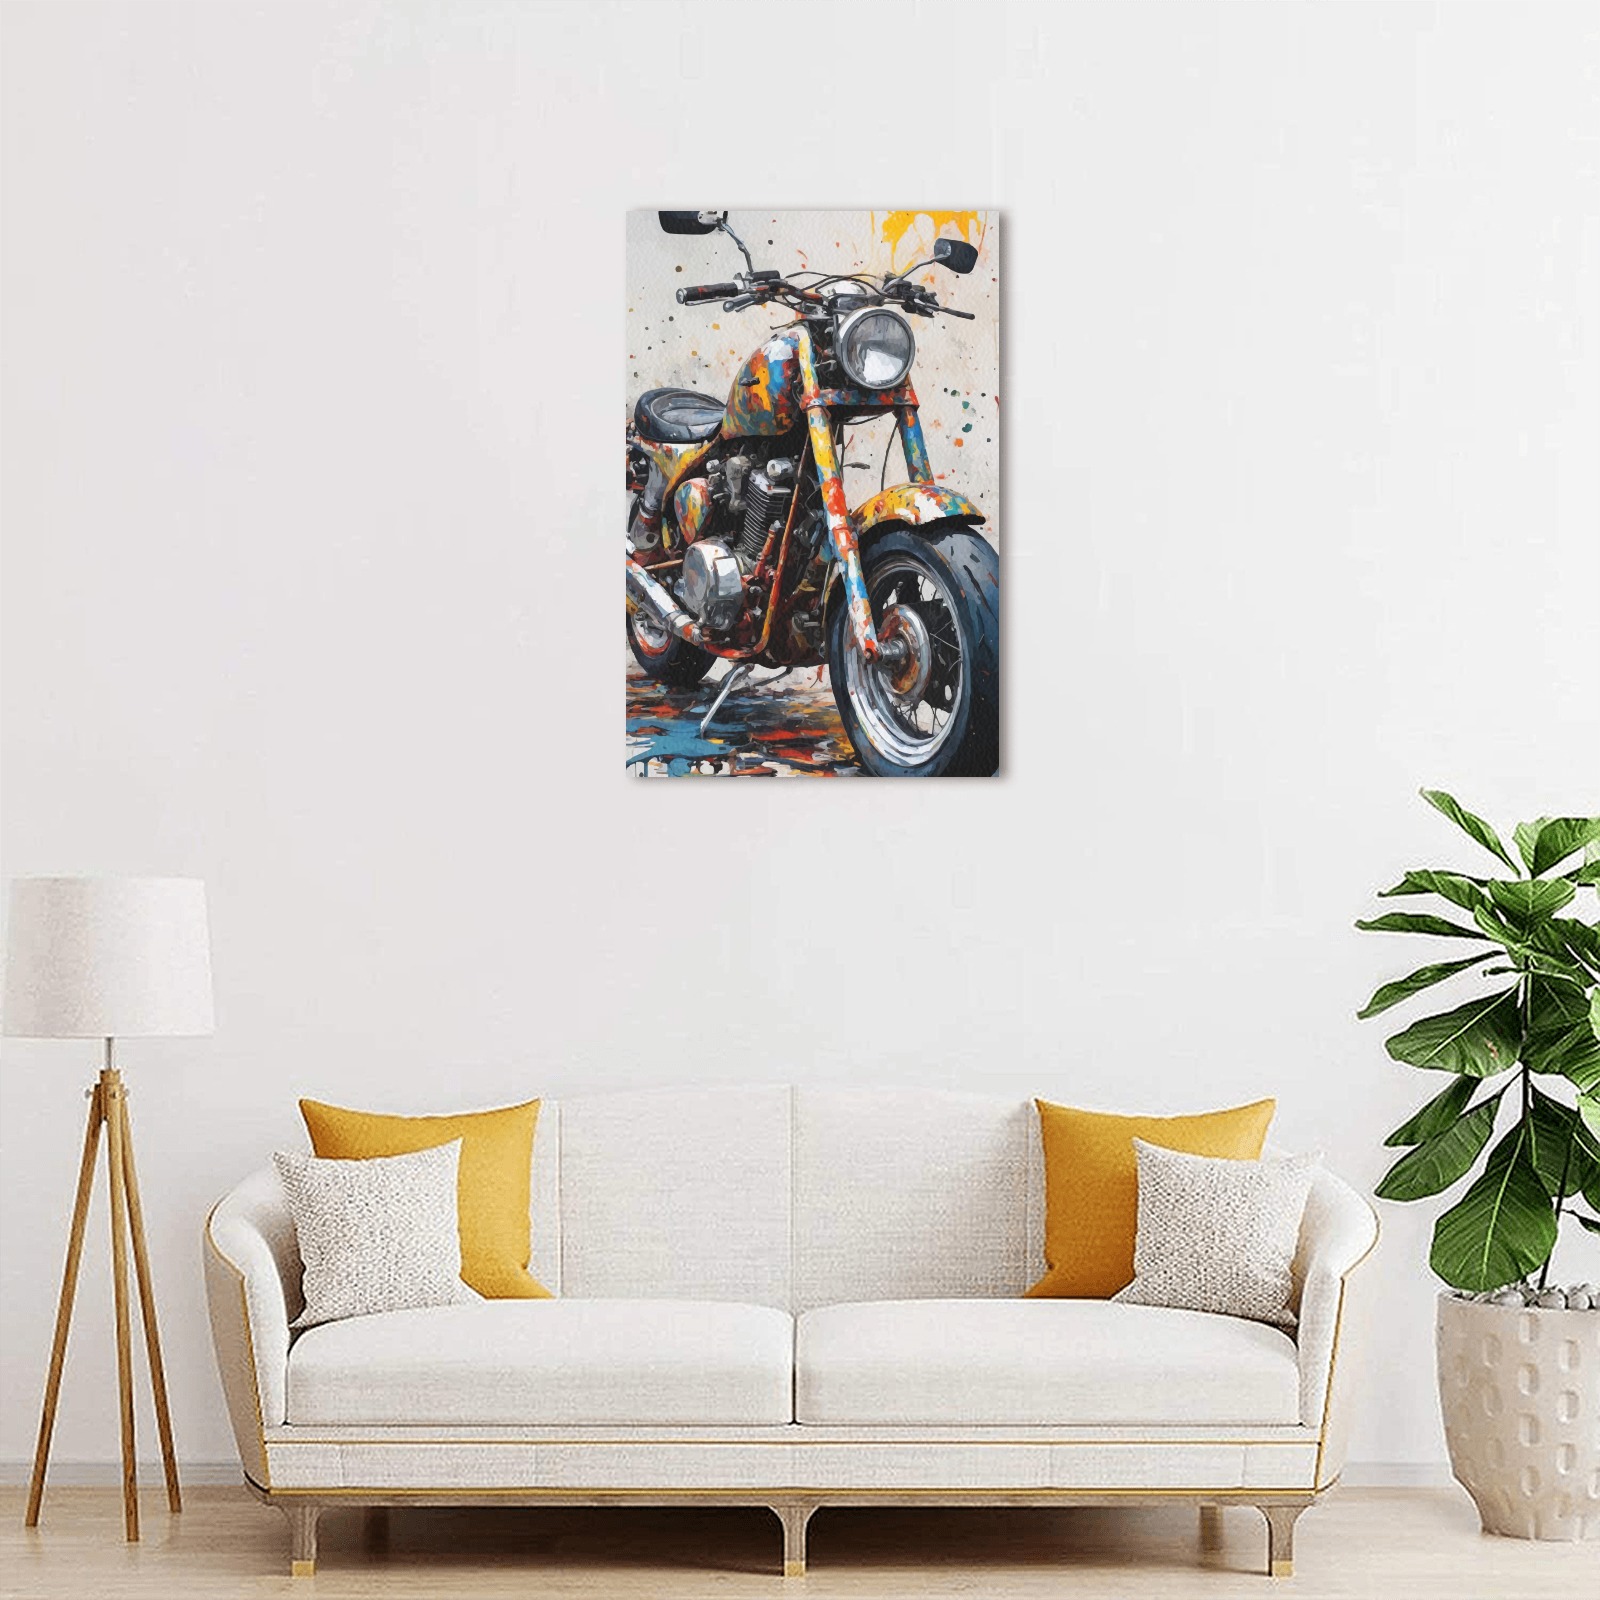 Cool vintage motorbike and splatters of colors art Upgraded Canvas Print 12"x18"